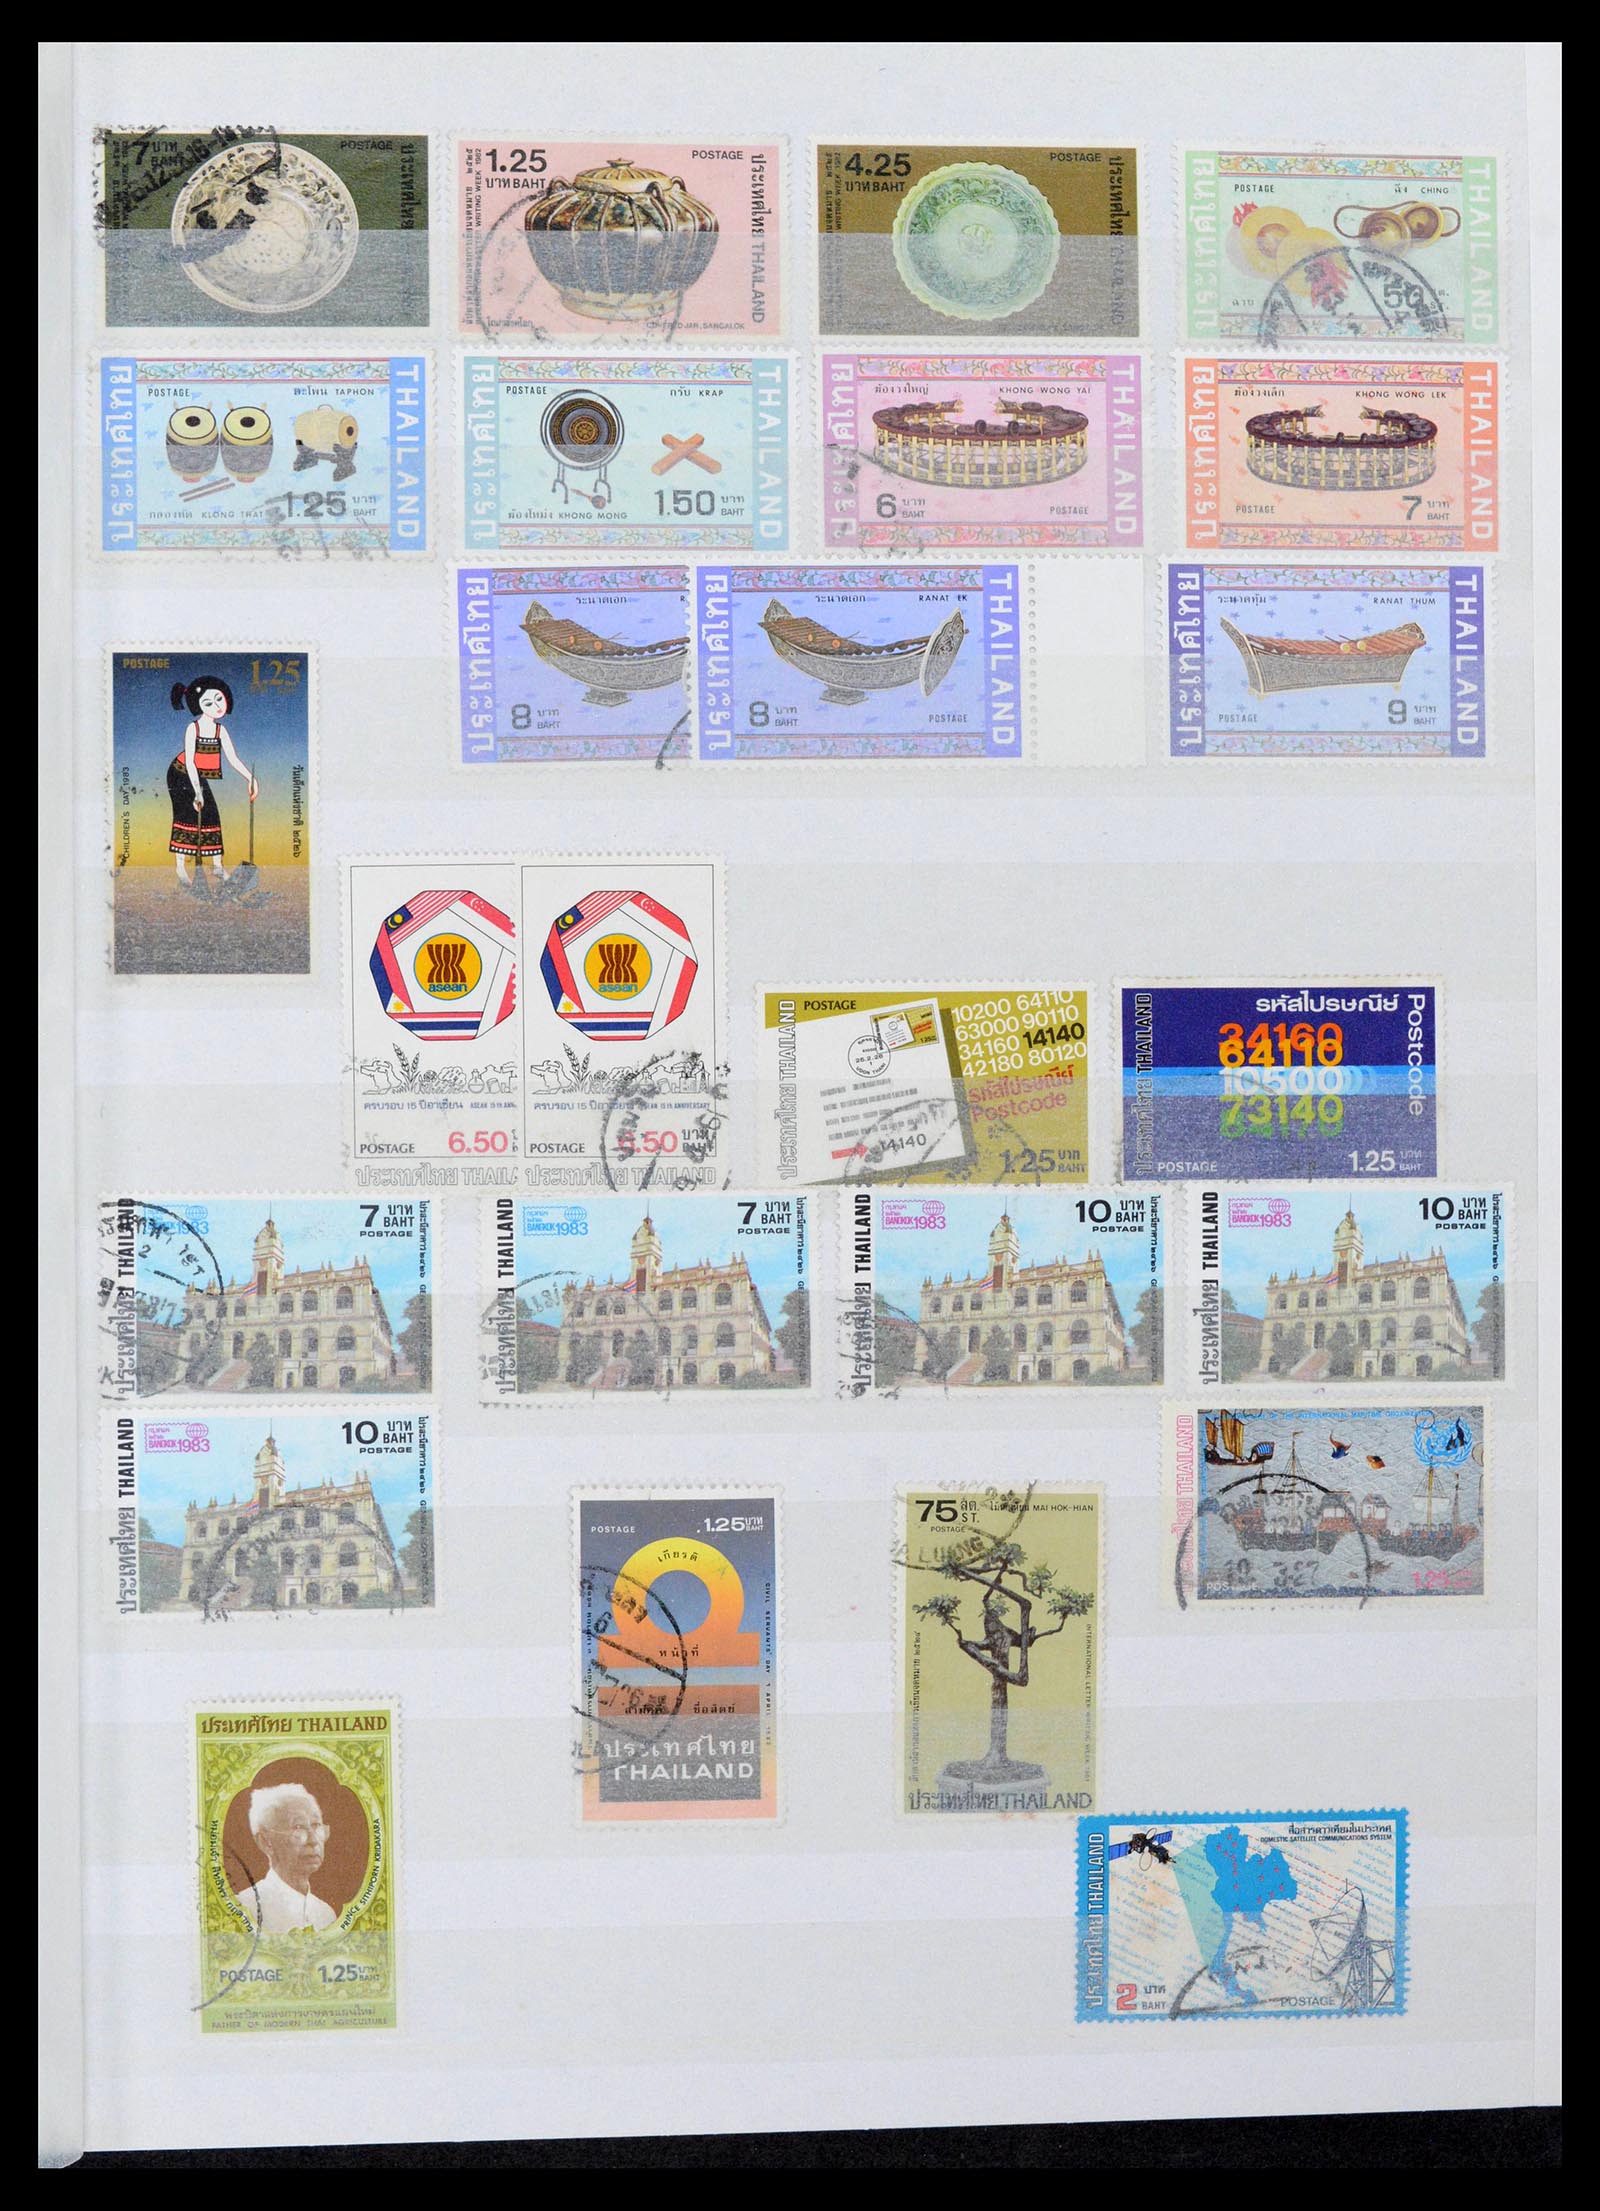 39384 0047 - Stamp collection 39384 Thailand 1883-2014.